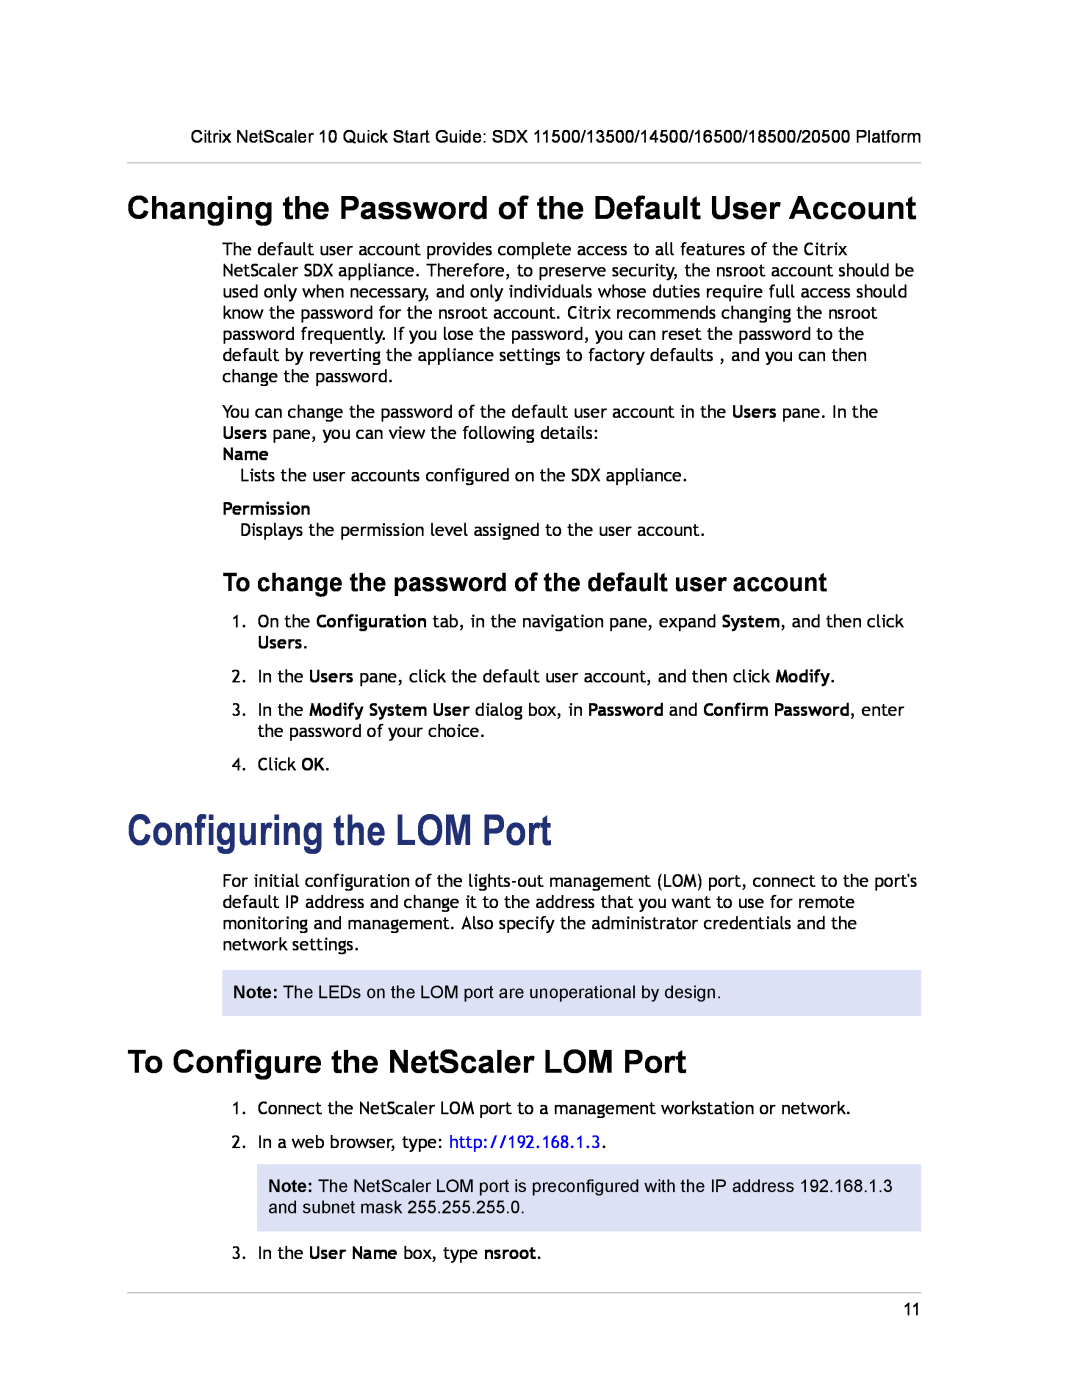 Citrix Systems SDX 14500 Configuring the LOM Port, Changing the Password of the Default User Account, Name, Permission 